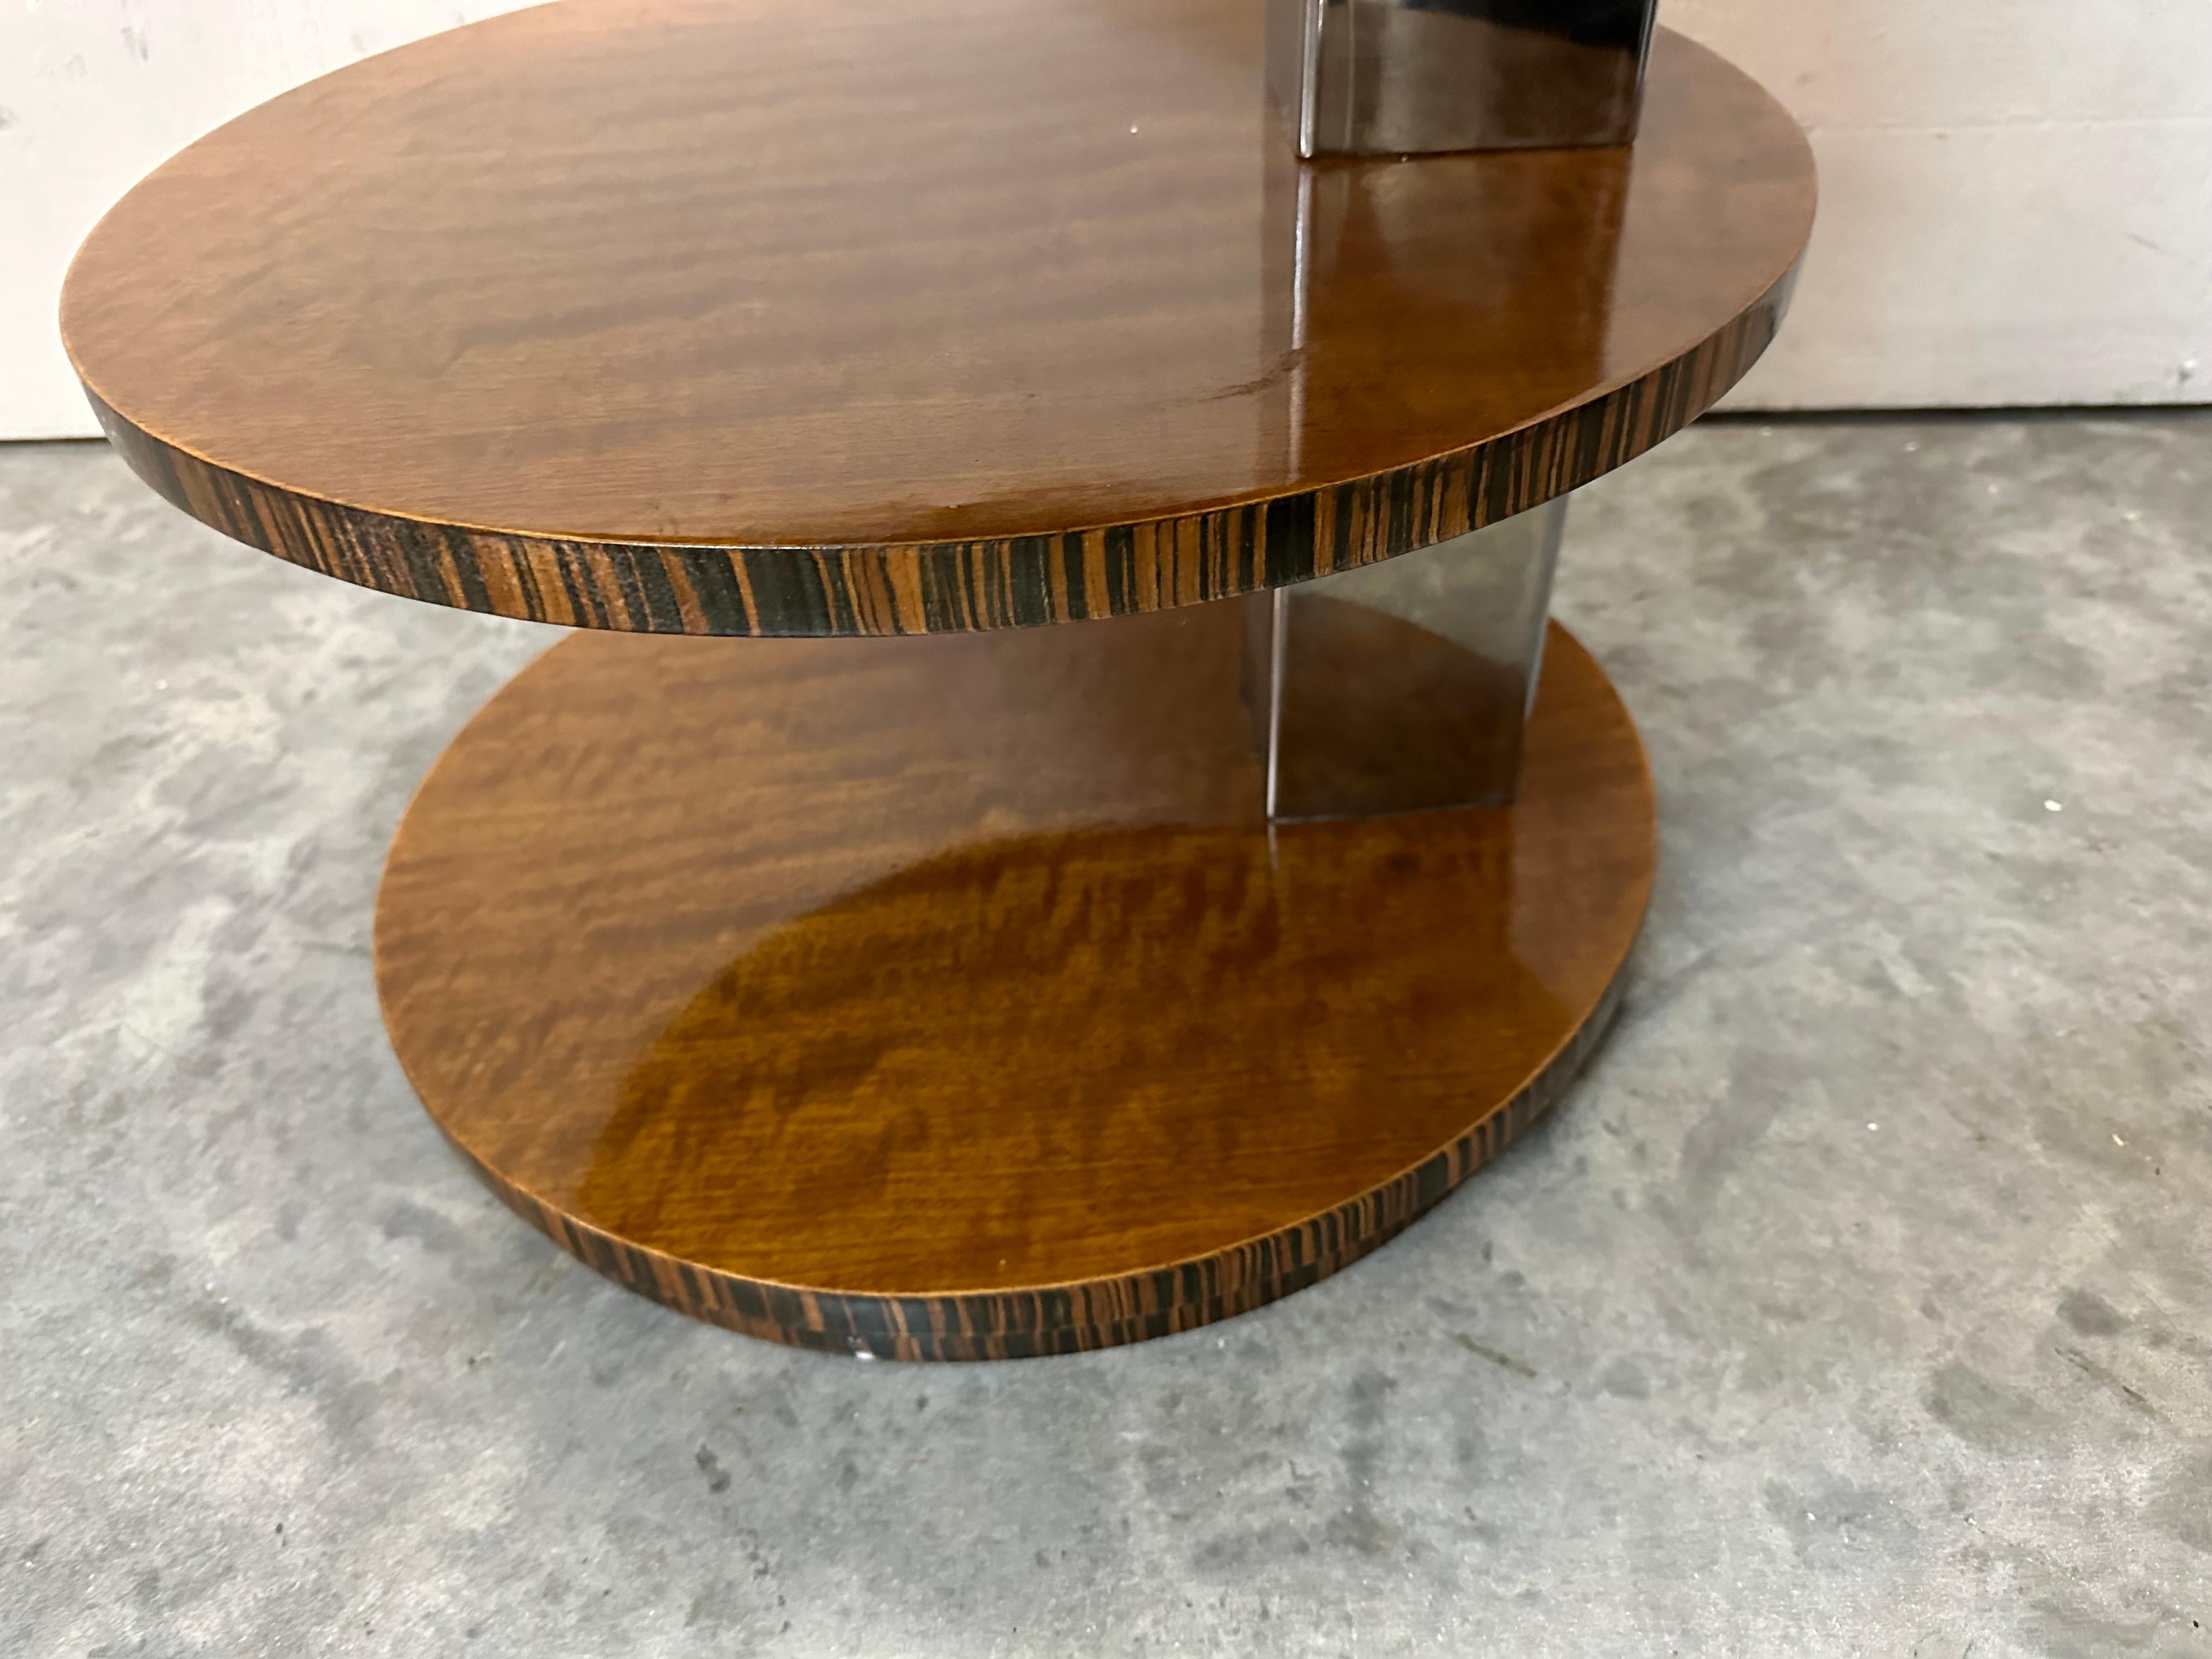 Three Tier Table 'Attributed to the Bauhaus' German For Sale 11